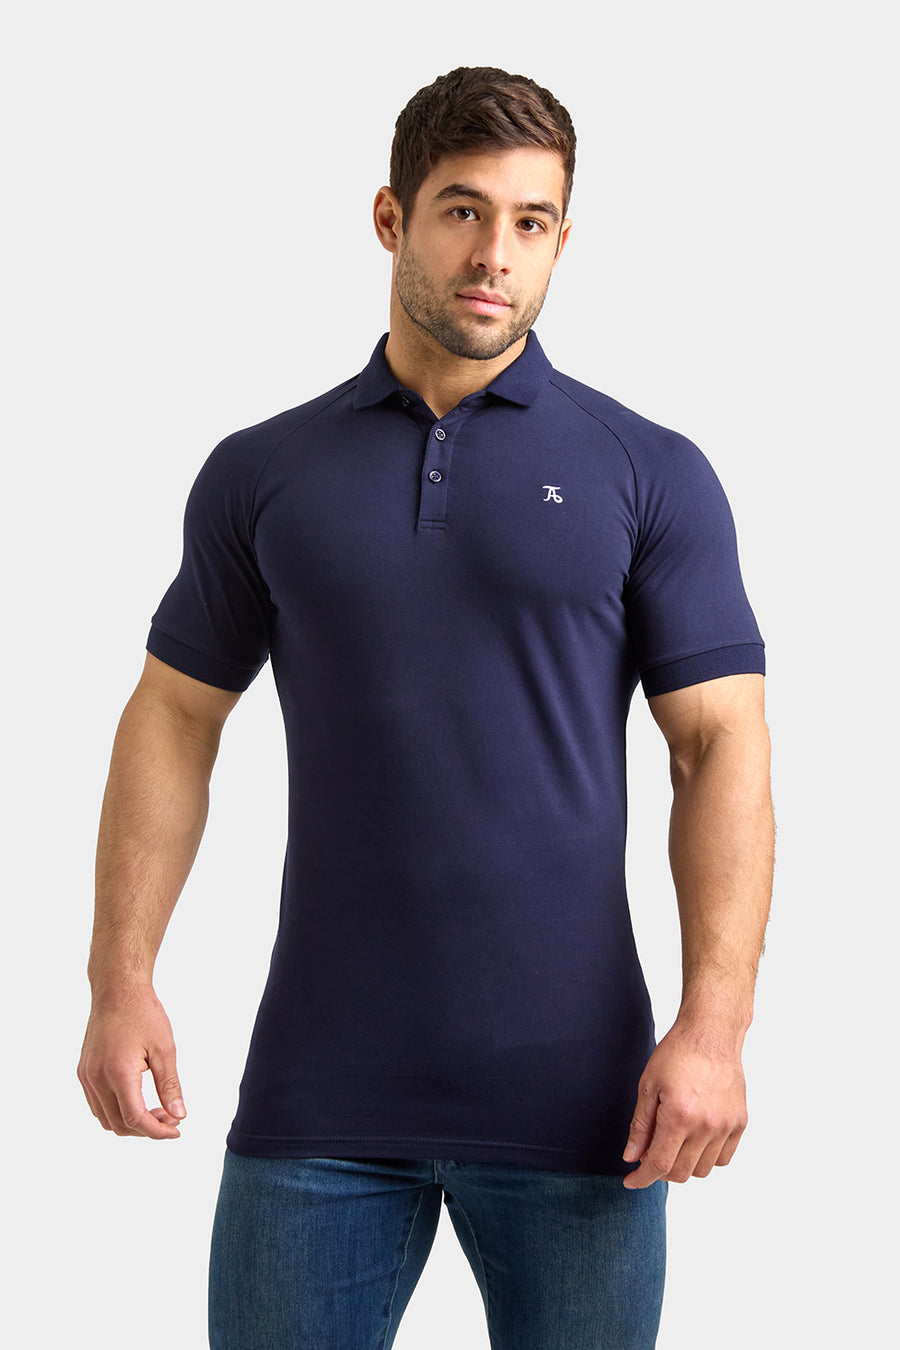 Athletic Fit Polo Shirt in True Navy - TAILORED ATHLETE - USA